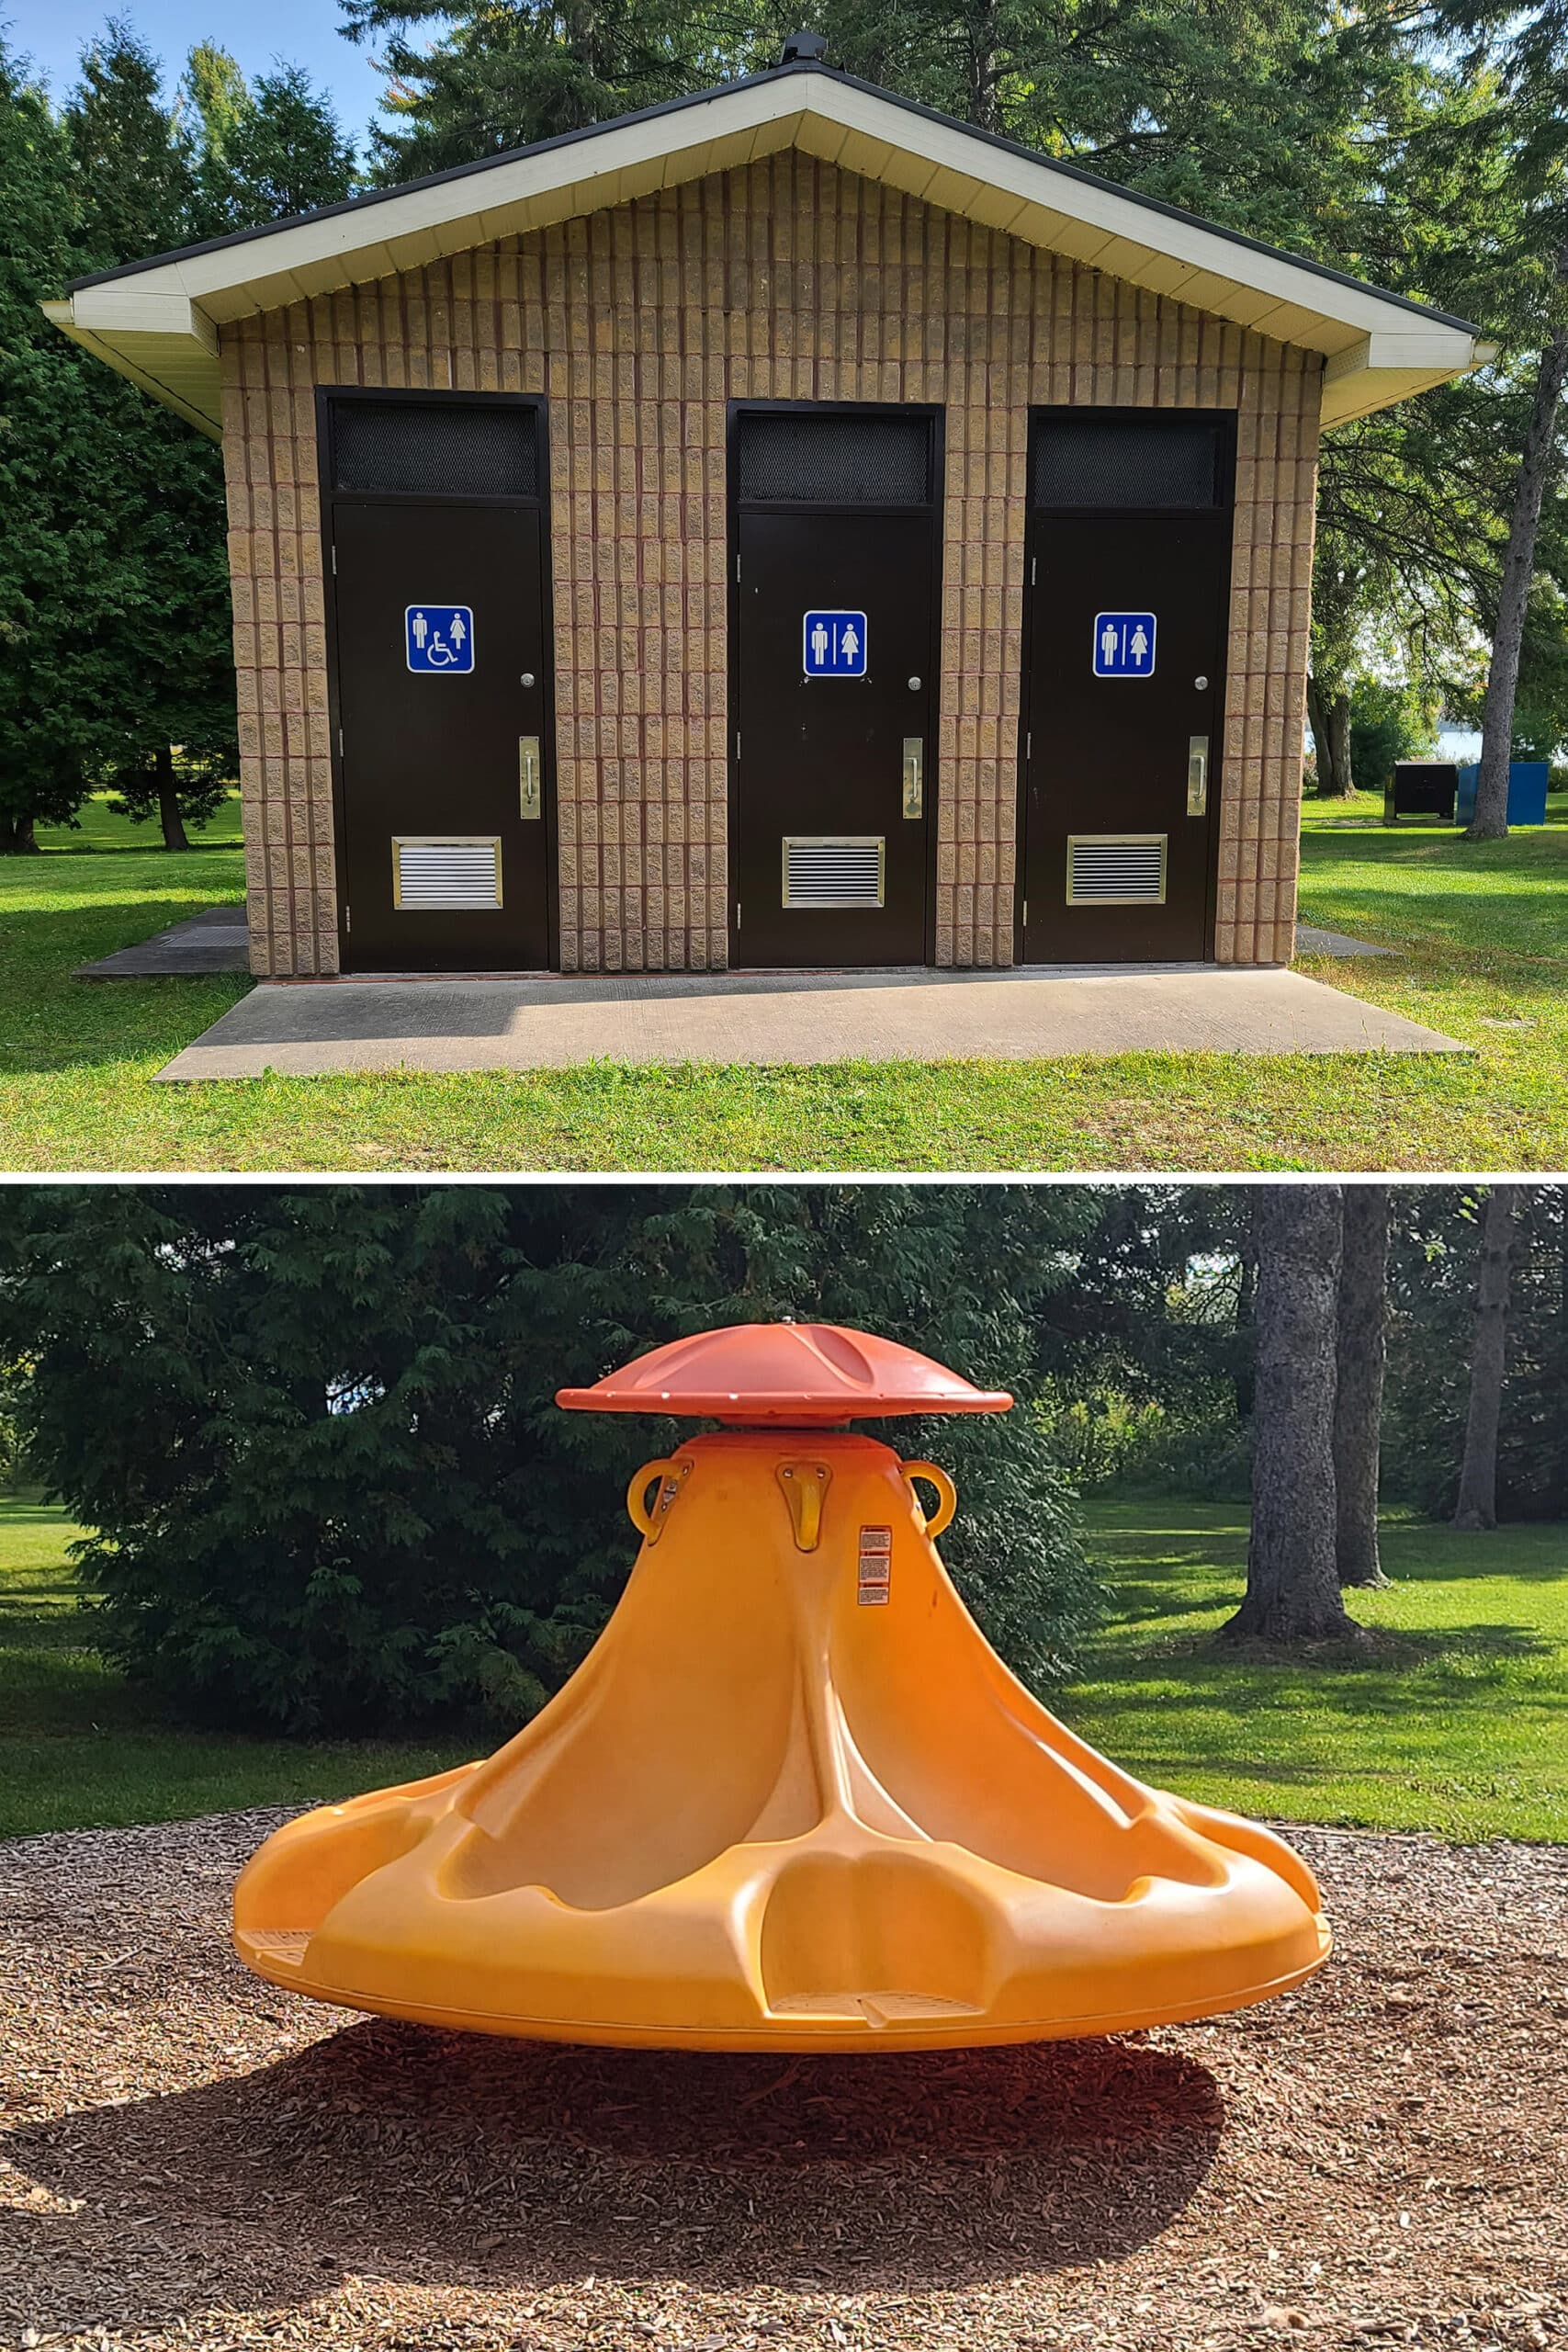 2 part image showing a small changeroom building, and a single piece of plastic playground equipment.